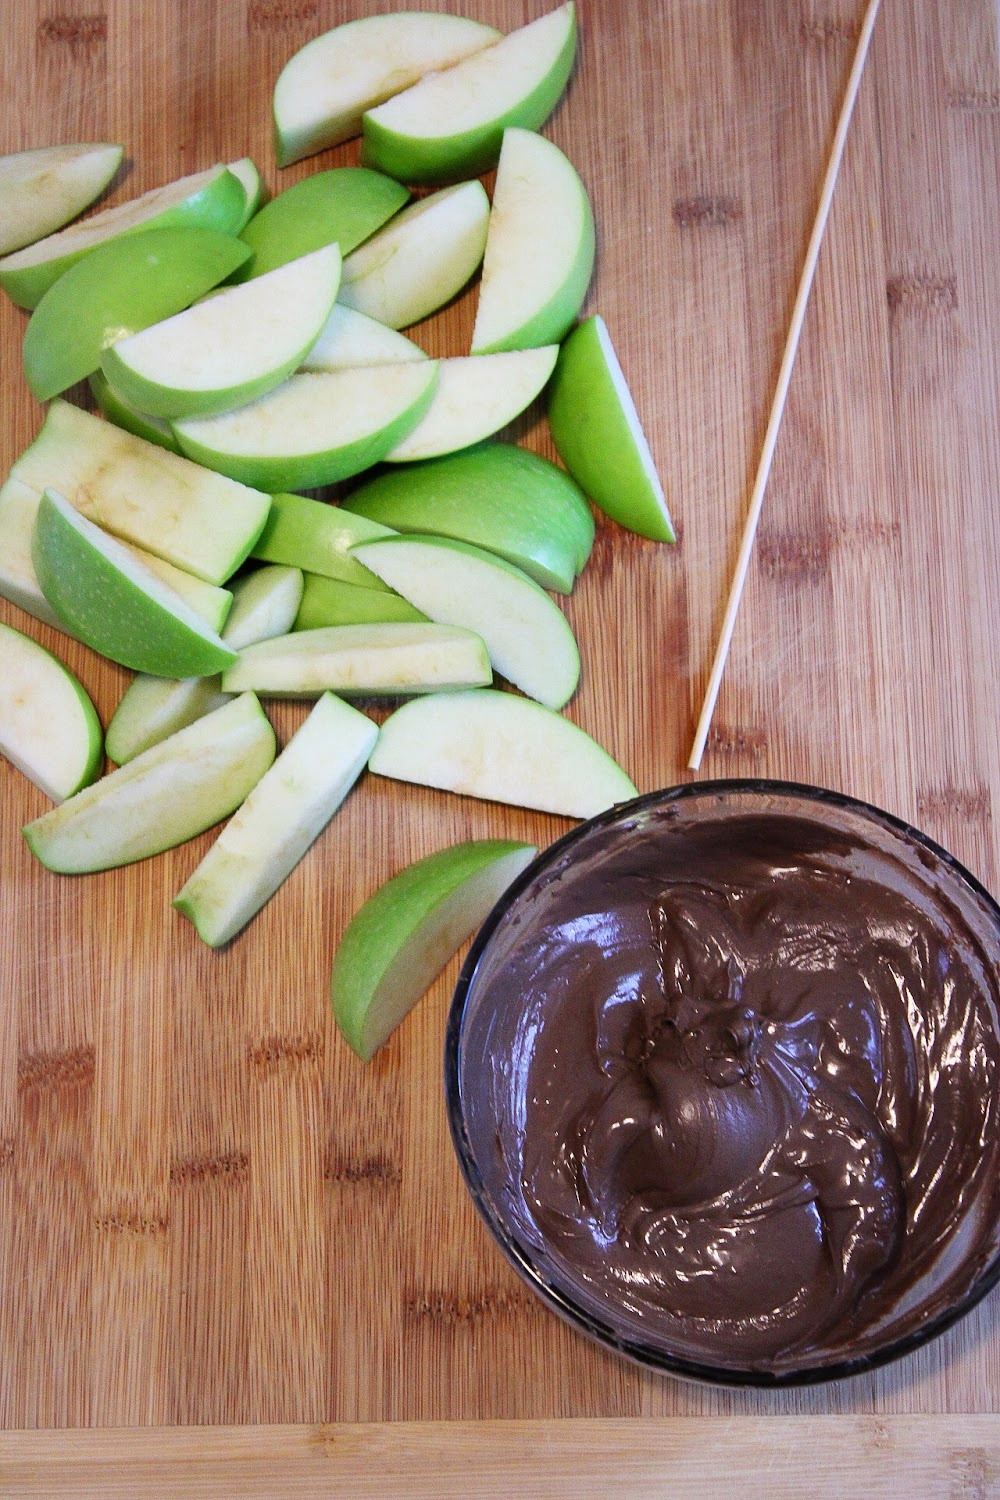 Melted bowl of chocolate and slices of green apples for dipping.